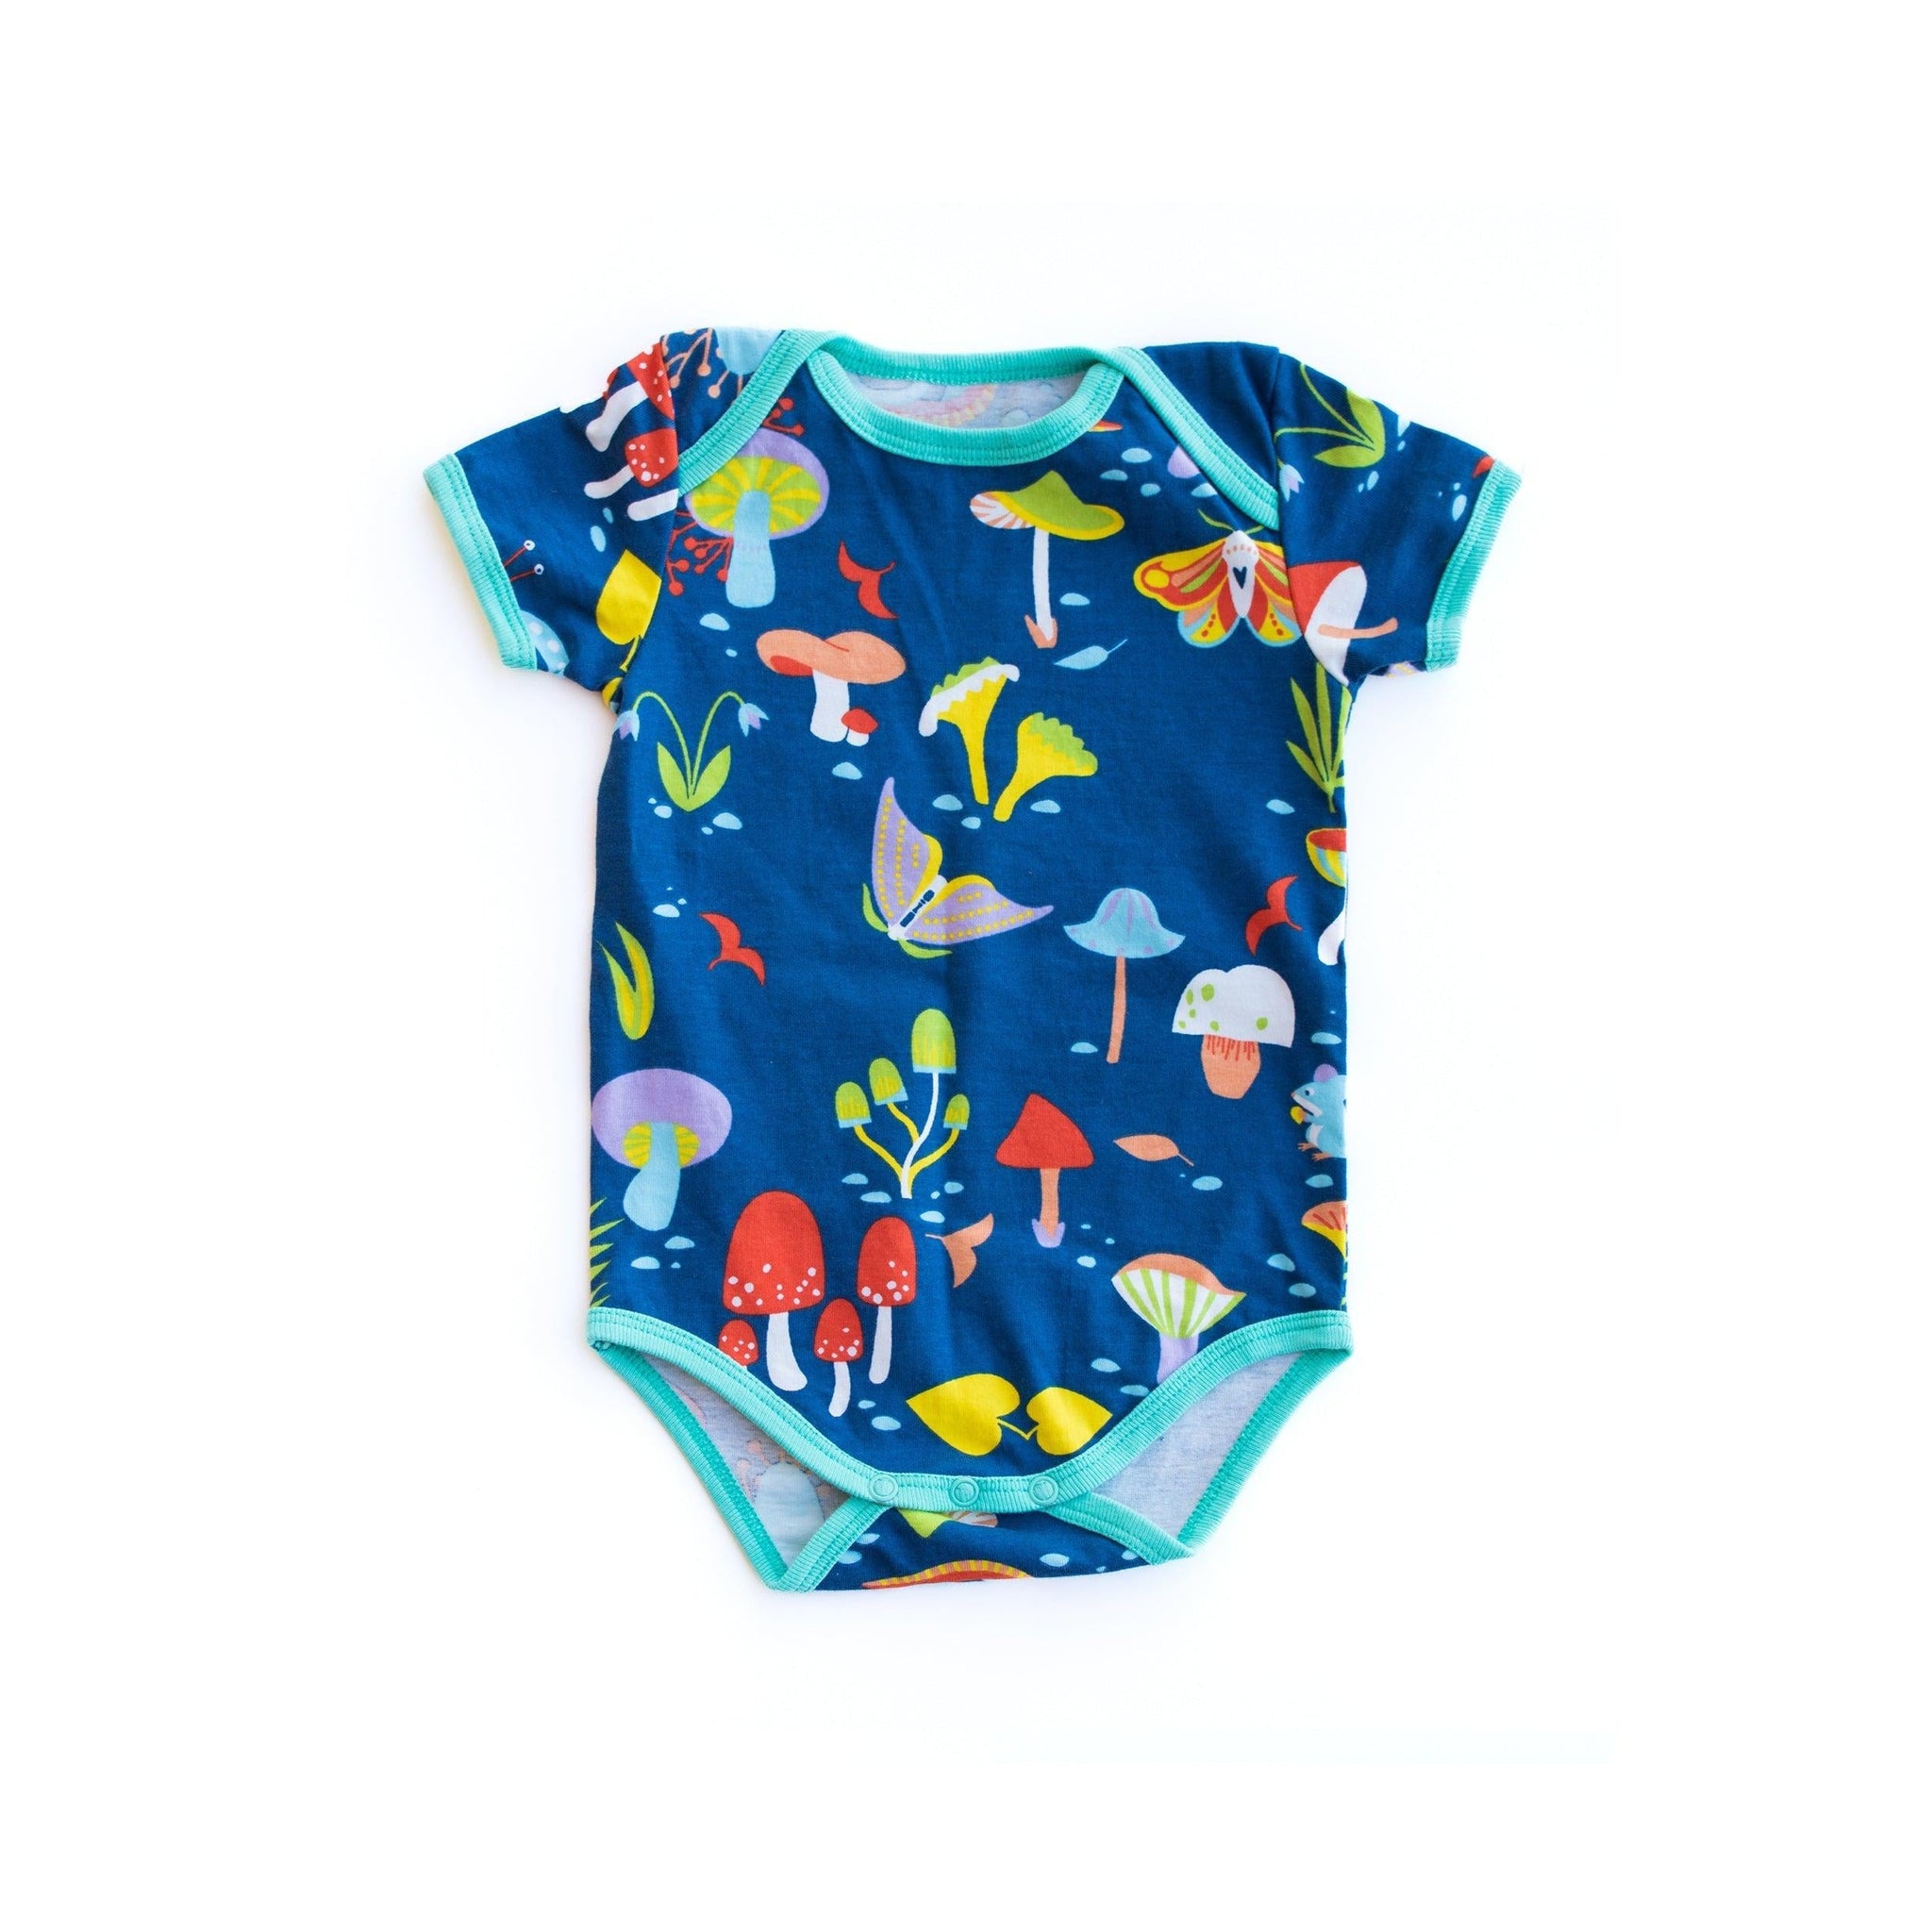 Merle - Forest at Night Short Sleeved Body Top (0-3 Months)